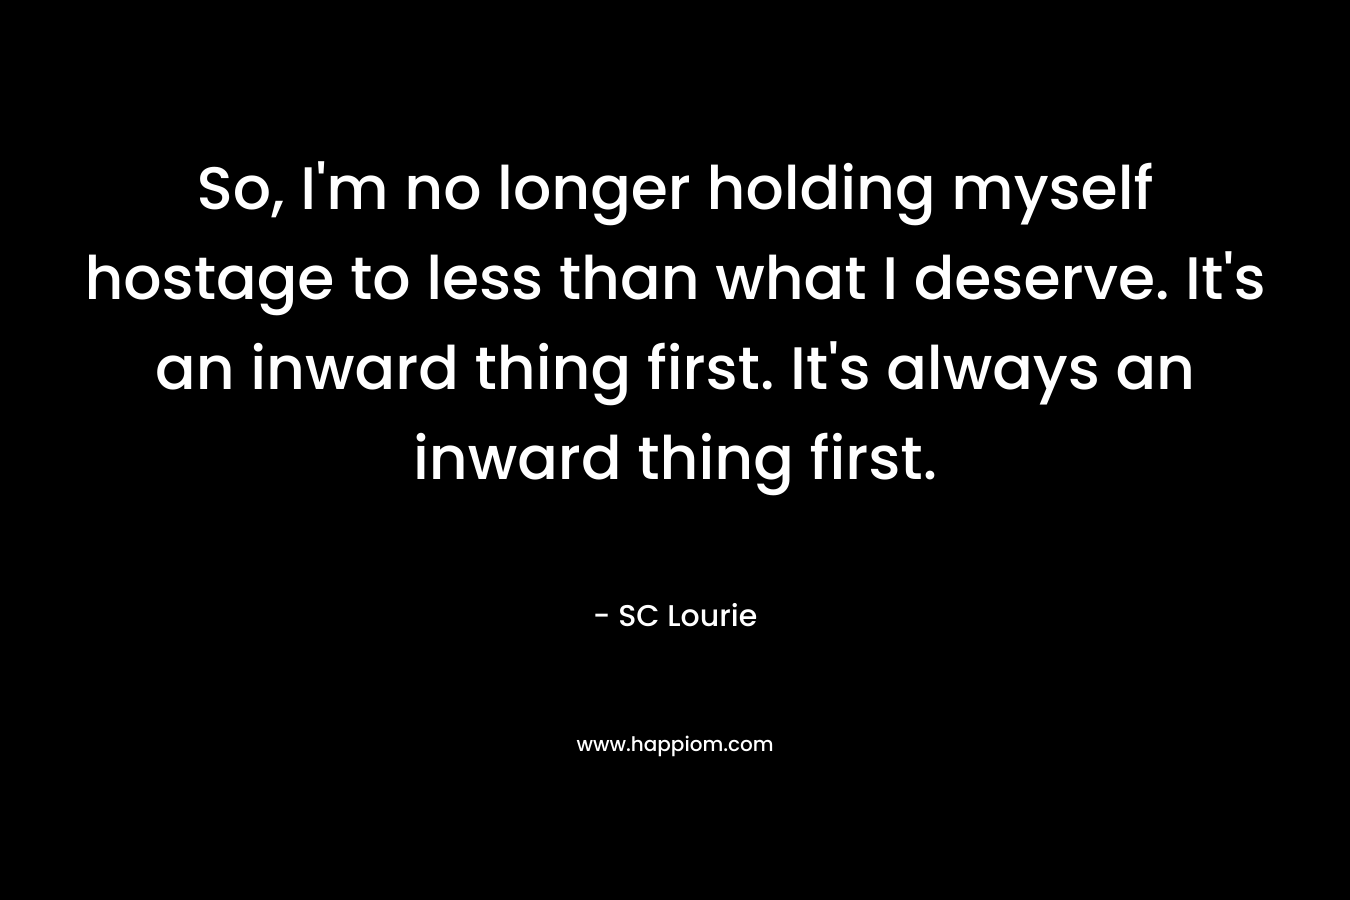 So, I'm no longer holding myself  hostage to less than what I deserve. It's an inward thing first. It's always an inward thing first.